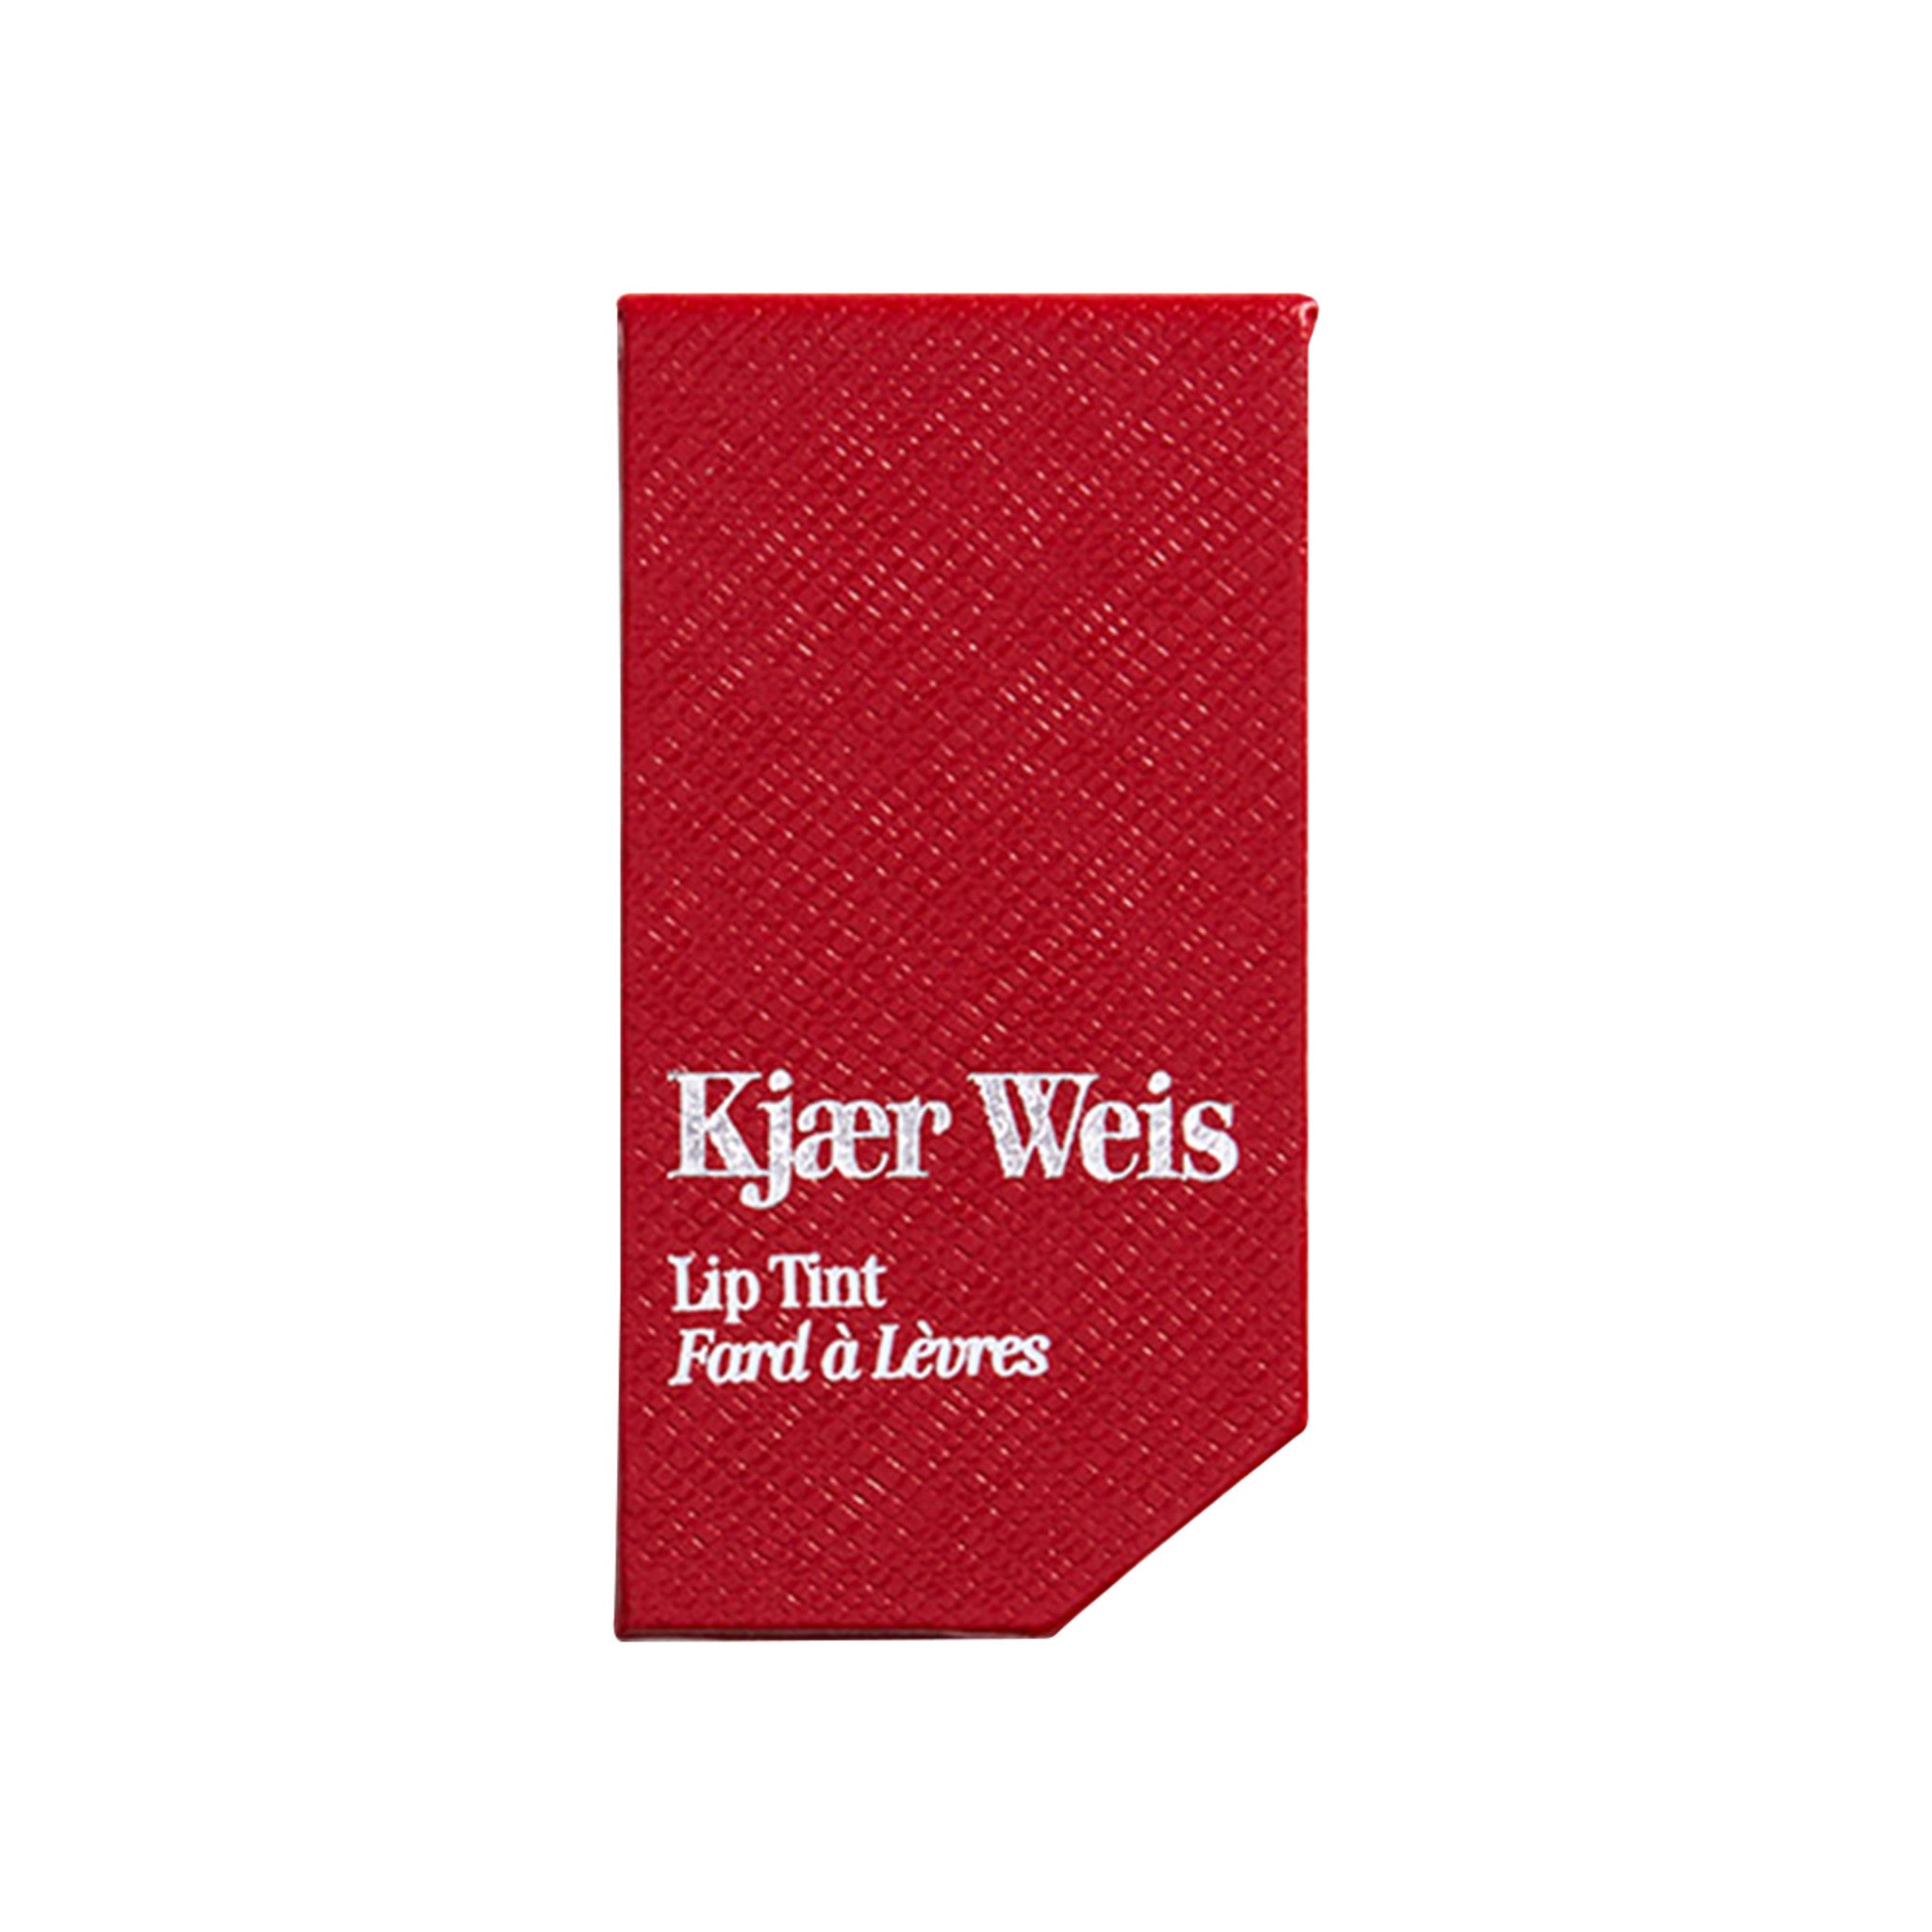 Kjaer Weis Red Edition Lip Tint Compact